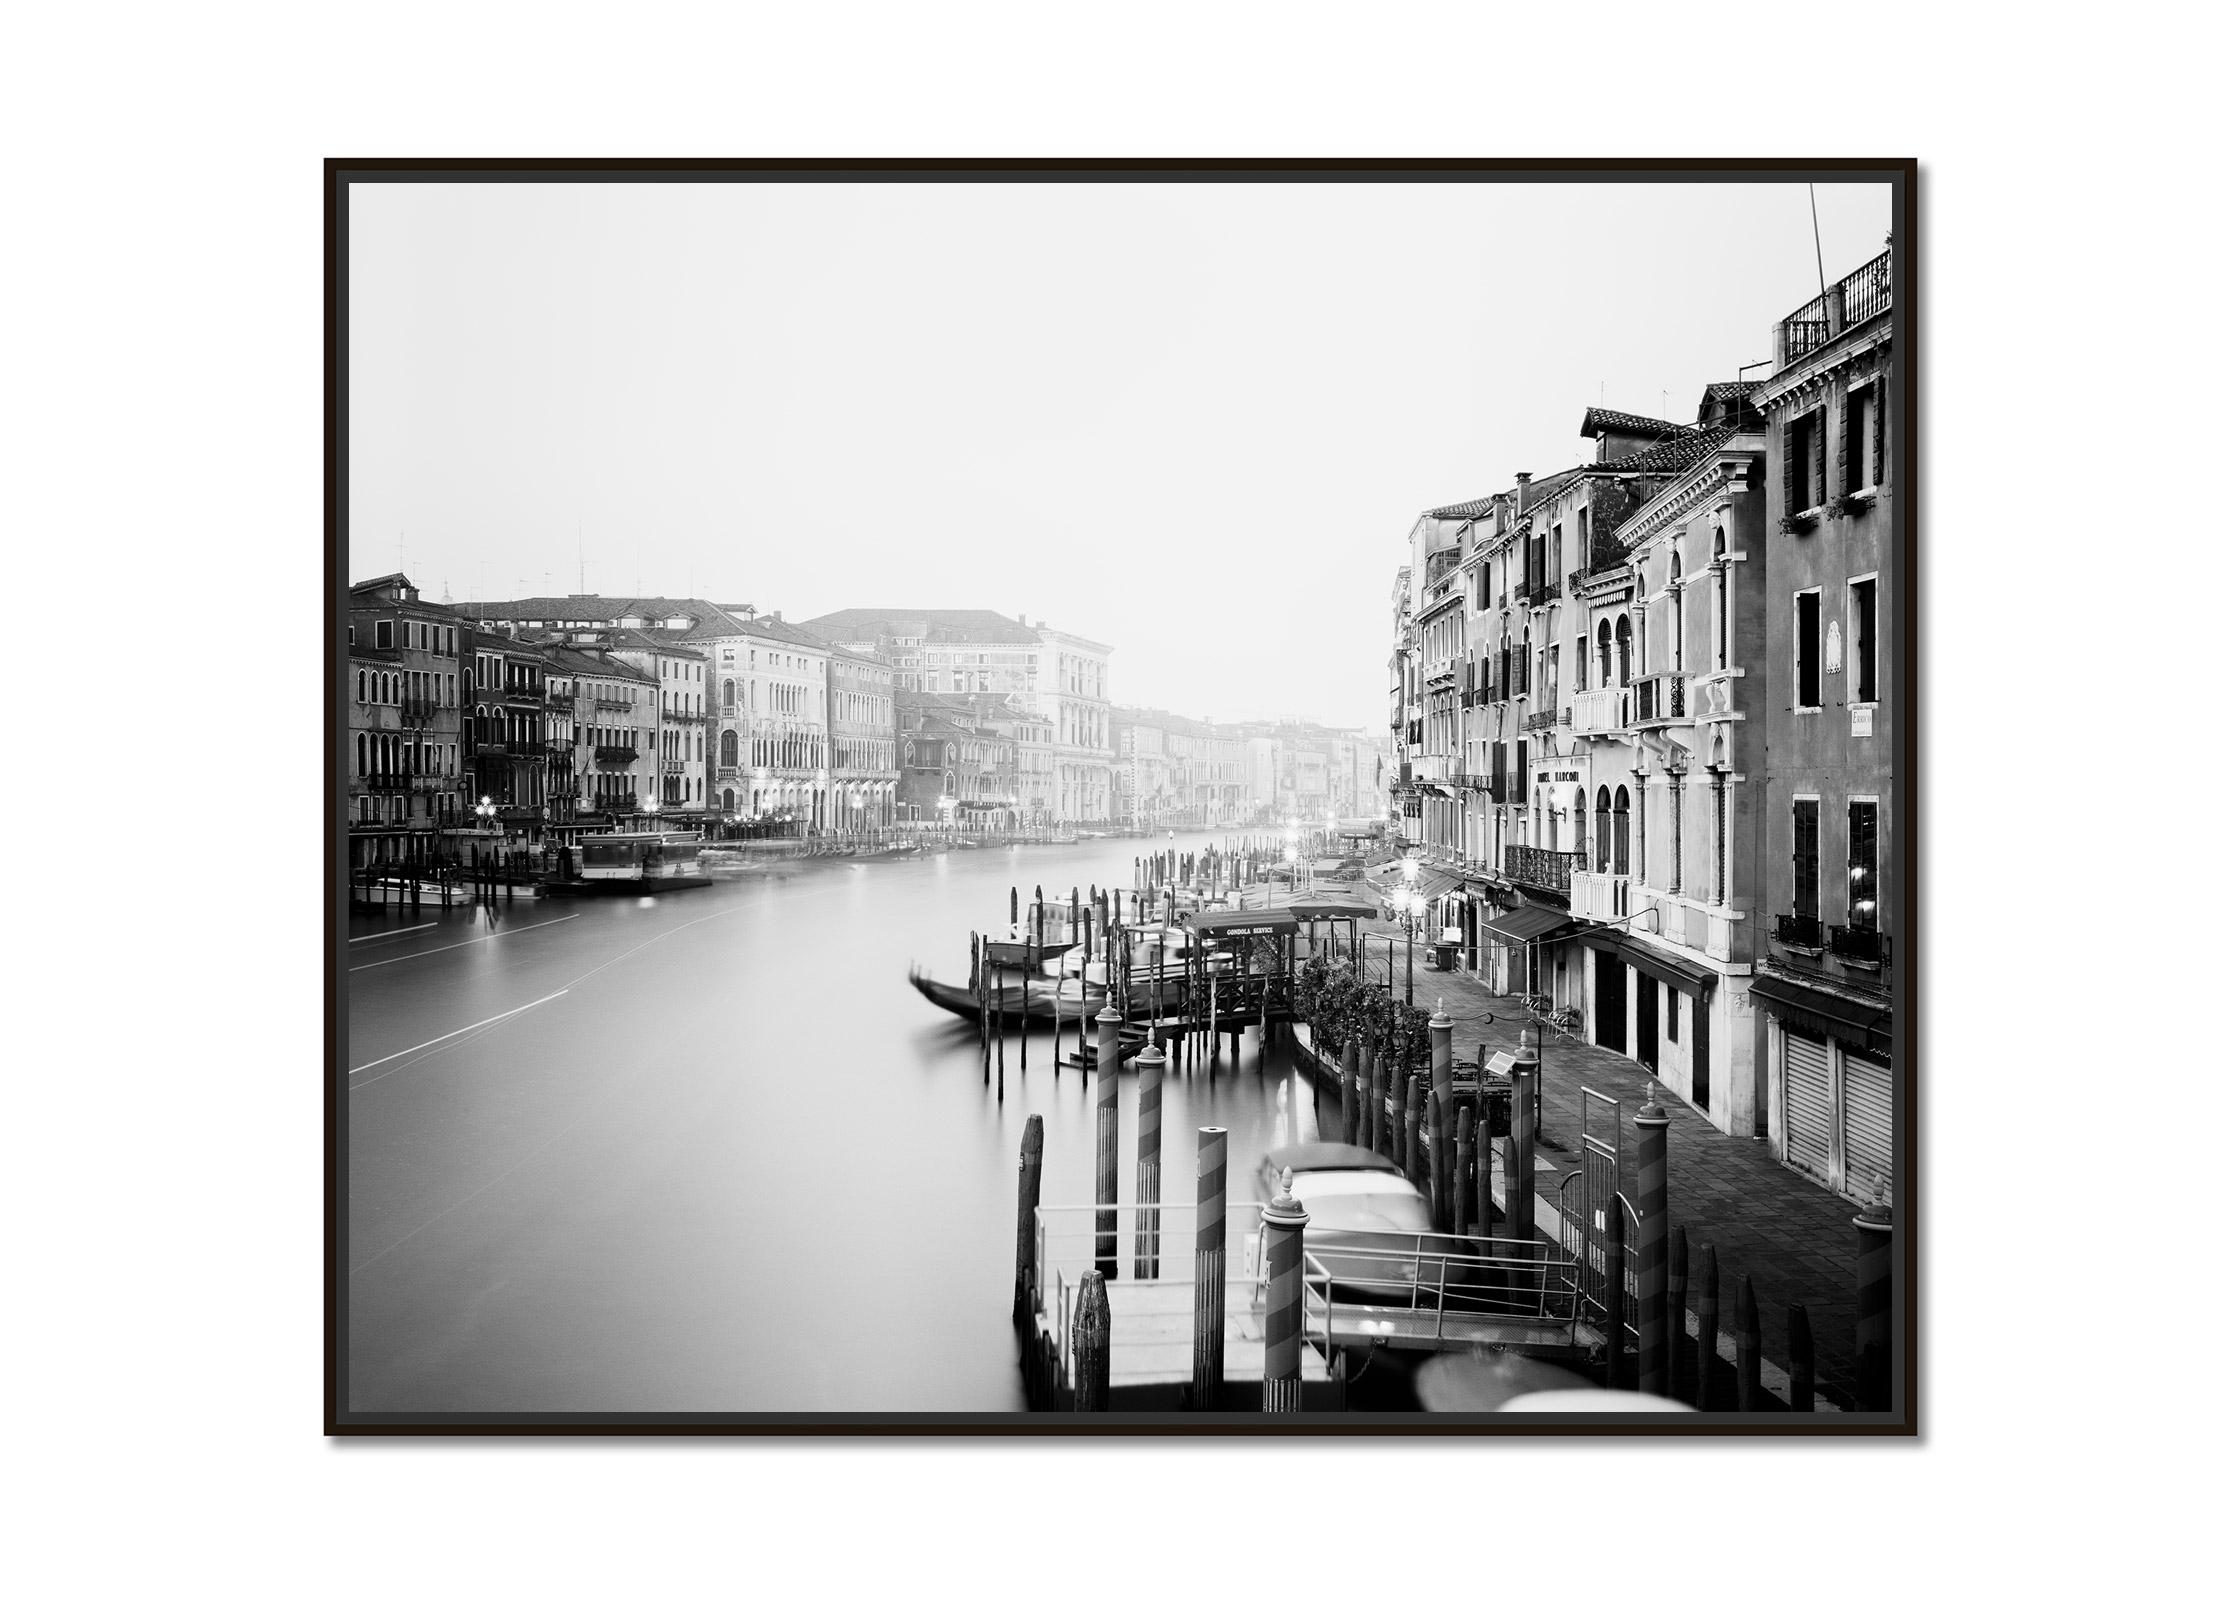 Canal Grande, Rialto Bridge View, Venice, black and white landscape photography - Photograph by Gerald Berghammer